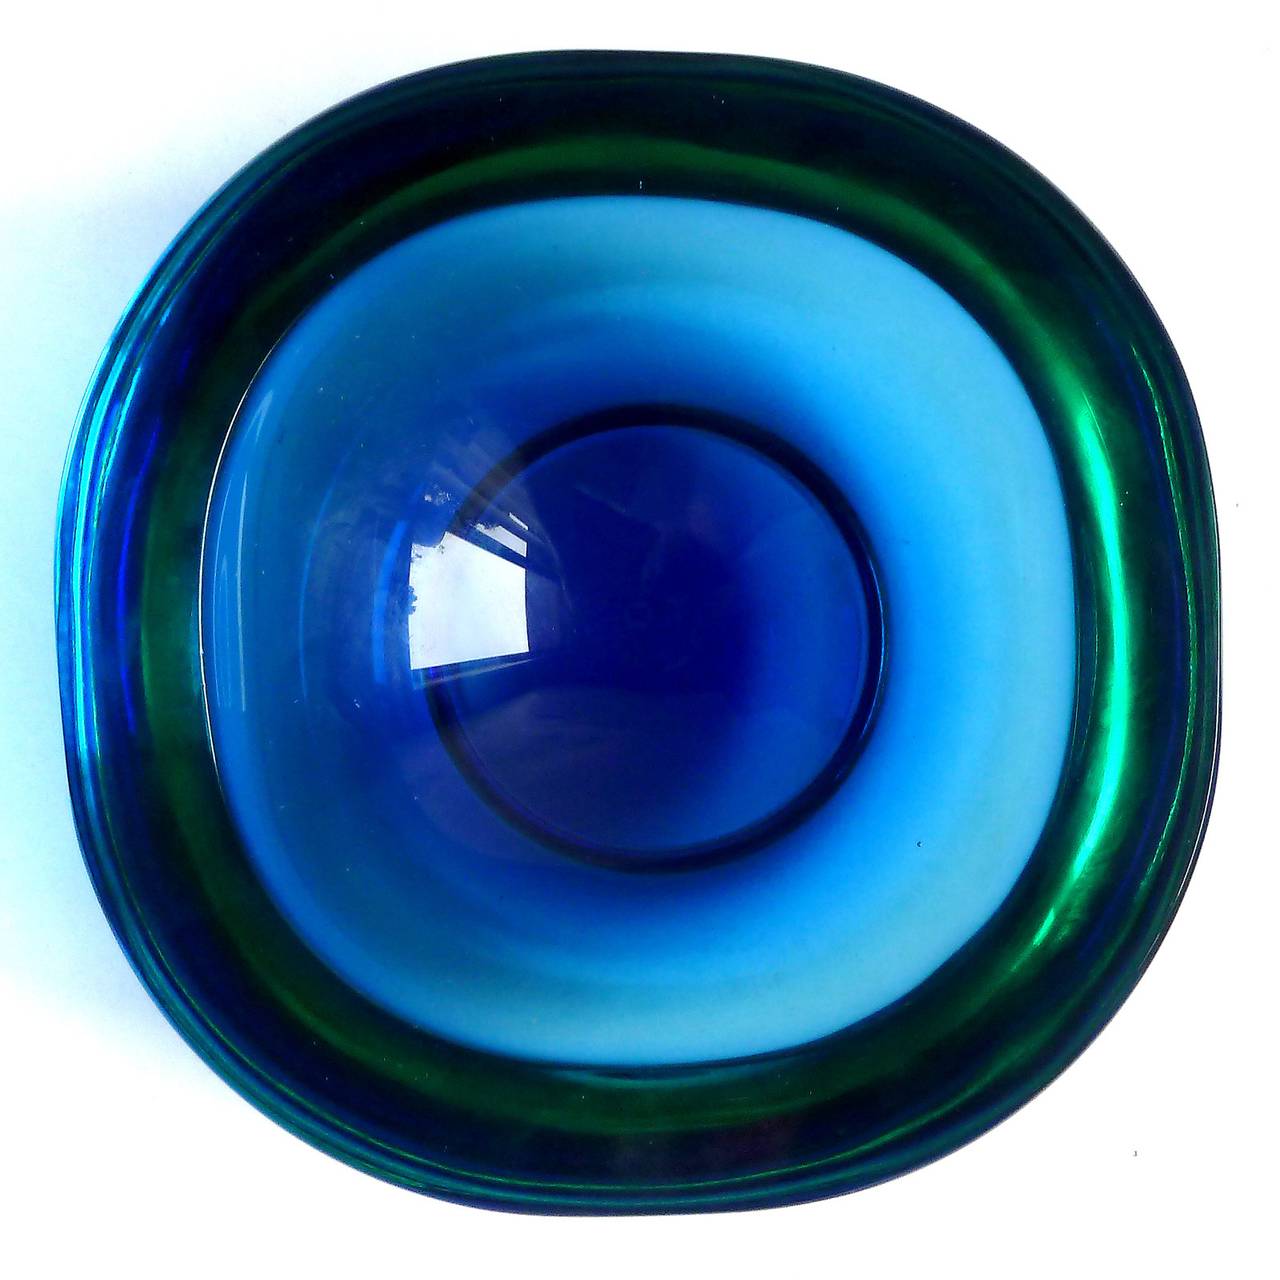 FREE Shipping Worldwide! See details below description.

Beautiful Murano Hand Blown Aqua Blue Green and Deep Cobalt Blue Art Glass Bowl. Attributed to designers Flavio Poli and Archimede Seguso for the Seguso Vetri D' Arte company. The piece is